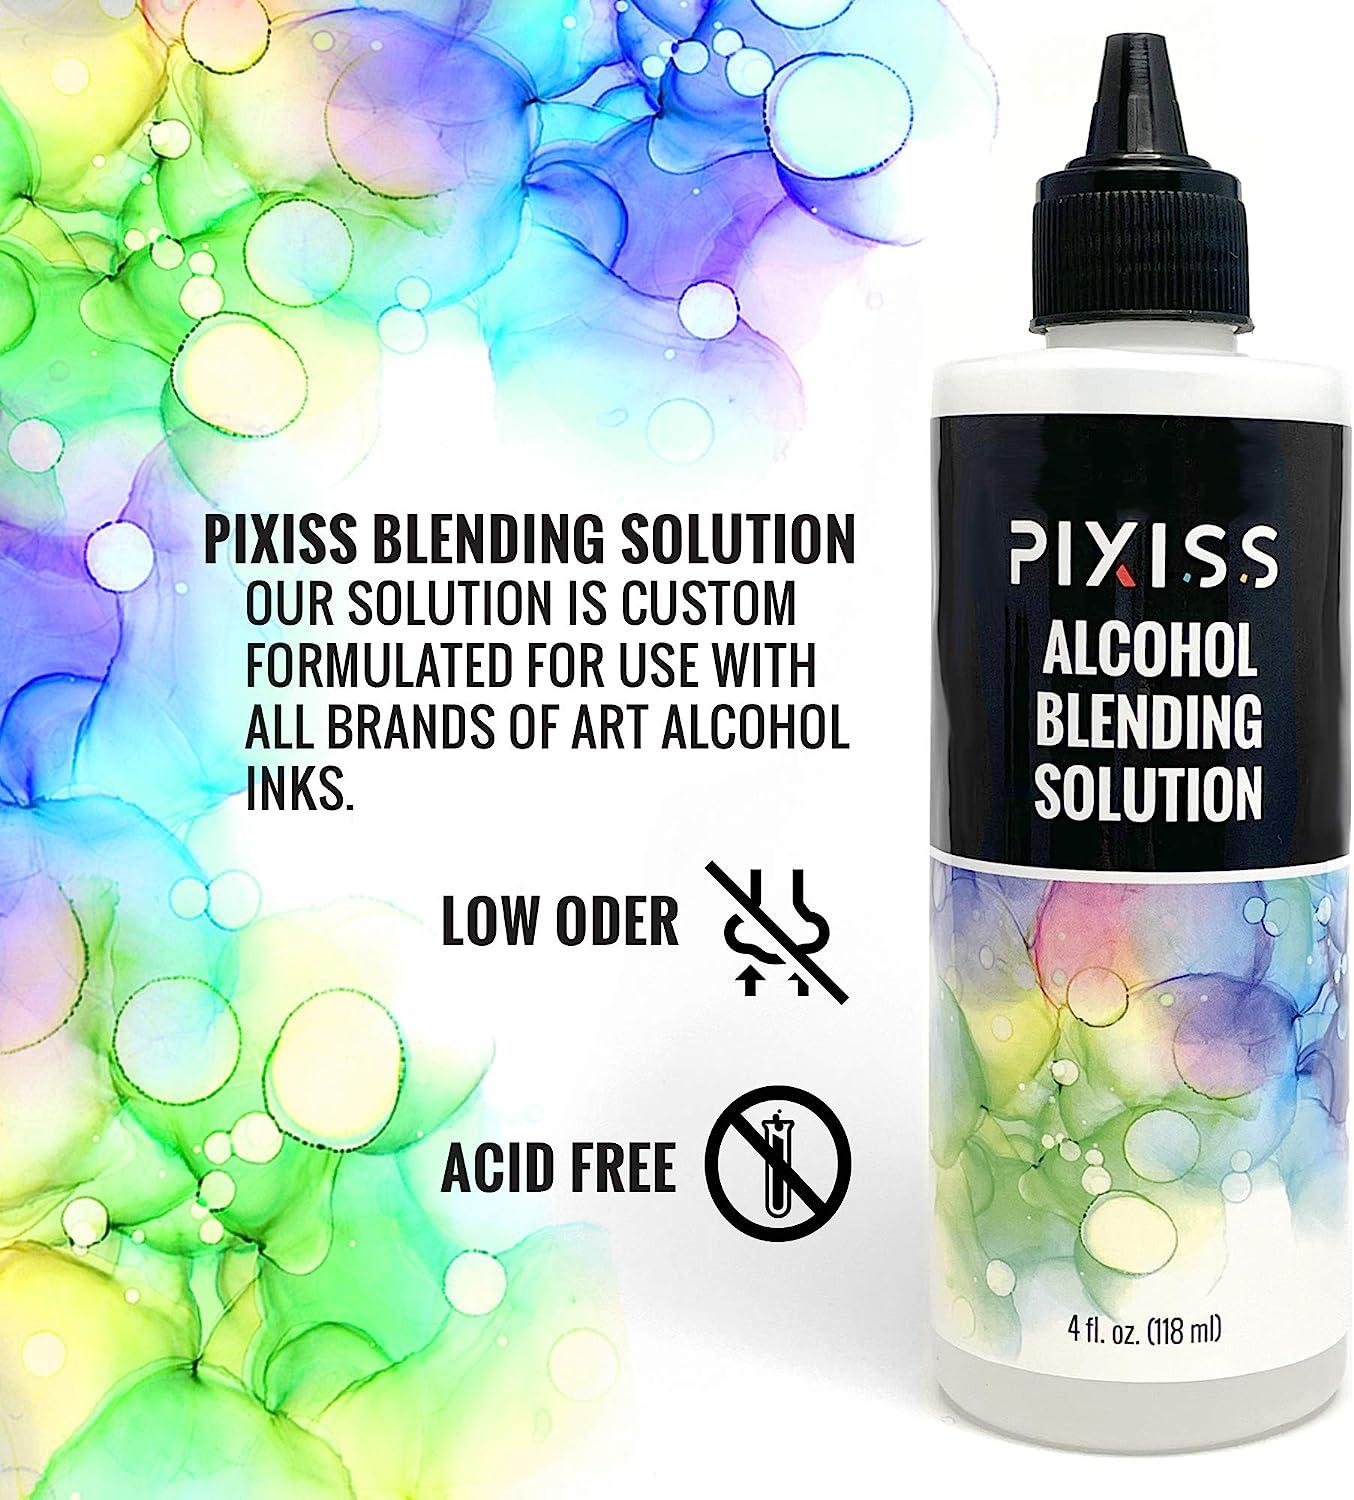 Pixiss Metallic Alcohol Ink Set, Gold Alcohol Ink, Silver, Gunmetal, Copper, Pearl, Alcohol Ink Metallic Mixatives with Extreme Shimmer for Alcohol